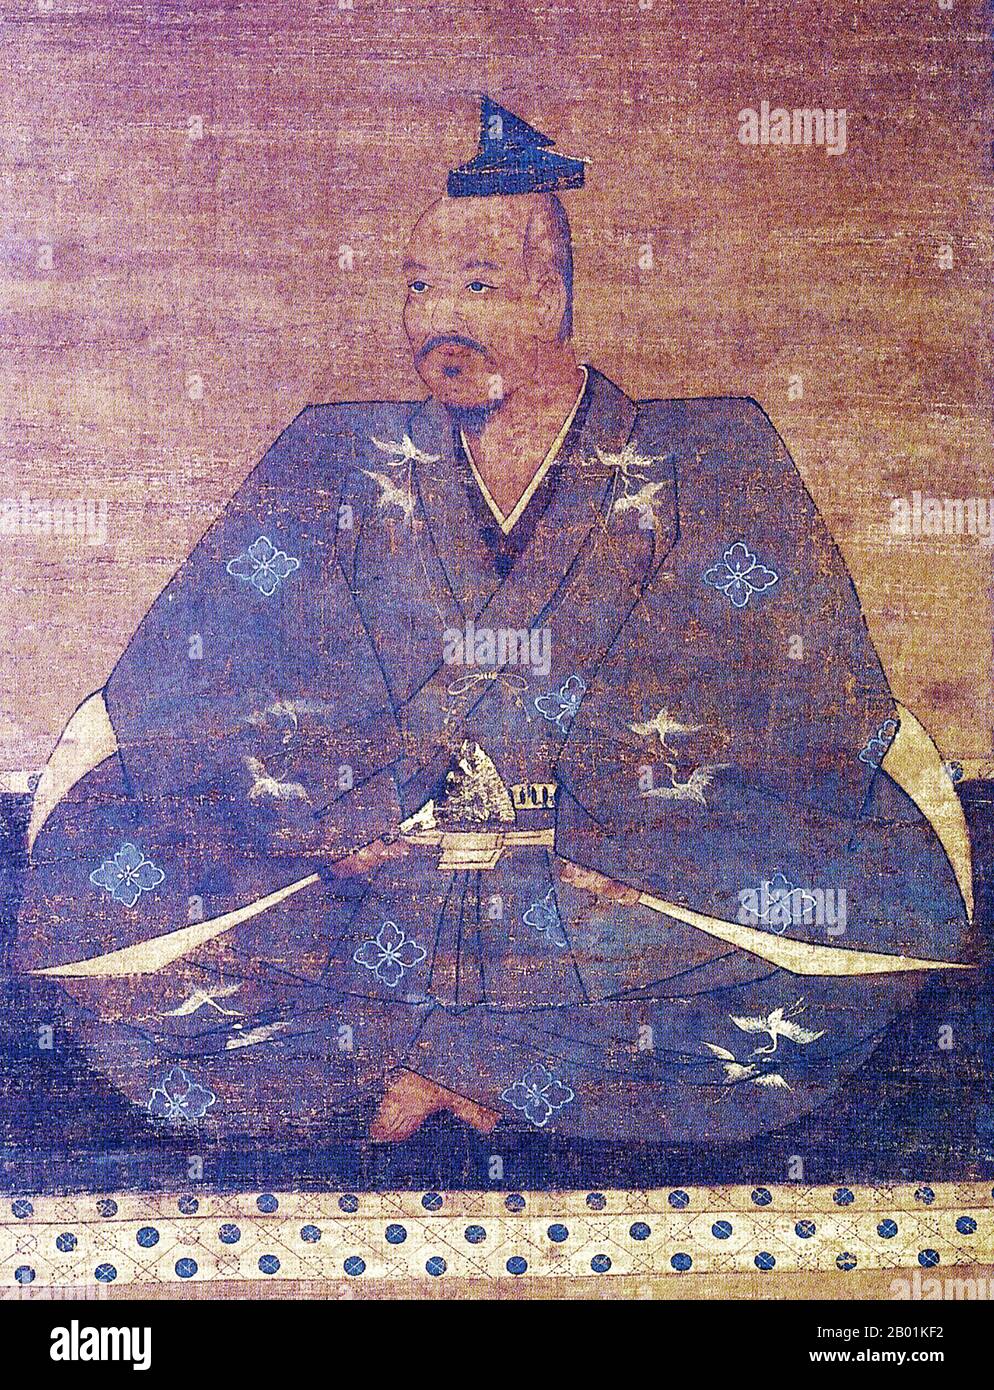 Japan: Takeda Shingen (1 December 1521 – 13 May 1573), Sengoku Period daimyo and militarist. Hanging scroll silk painting, 16th century.  Takeda Shingen, of Kai Province, was a preeminent daimyo in feudal Japan with exceptional military prestige in the late stage of the Sengoku period.  Known as the 'Tiger of Kai', he was one of the most powerful and influential leaders of the era. He is famous for the Battle of Mikatagahara, where he successfully defeated Tokugawa Ieyasu, handing the future shogun one of his worst defeats. He died under unclear circumstances during the Siege of Noda Castle. Stock Photo